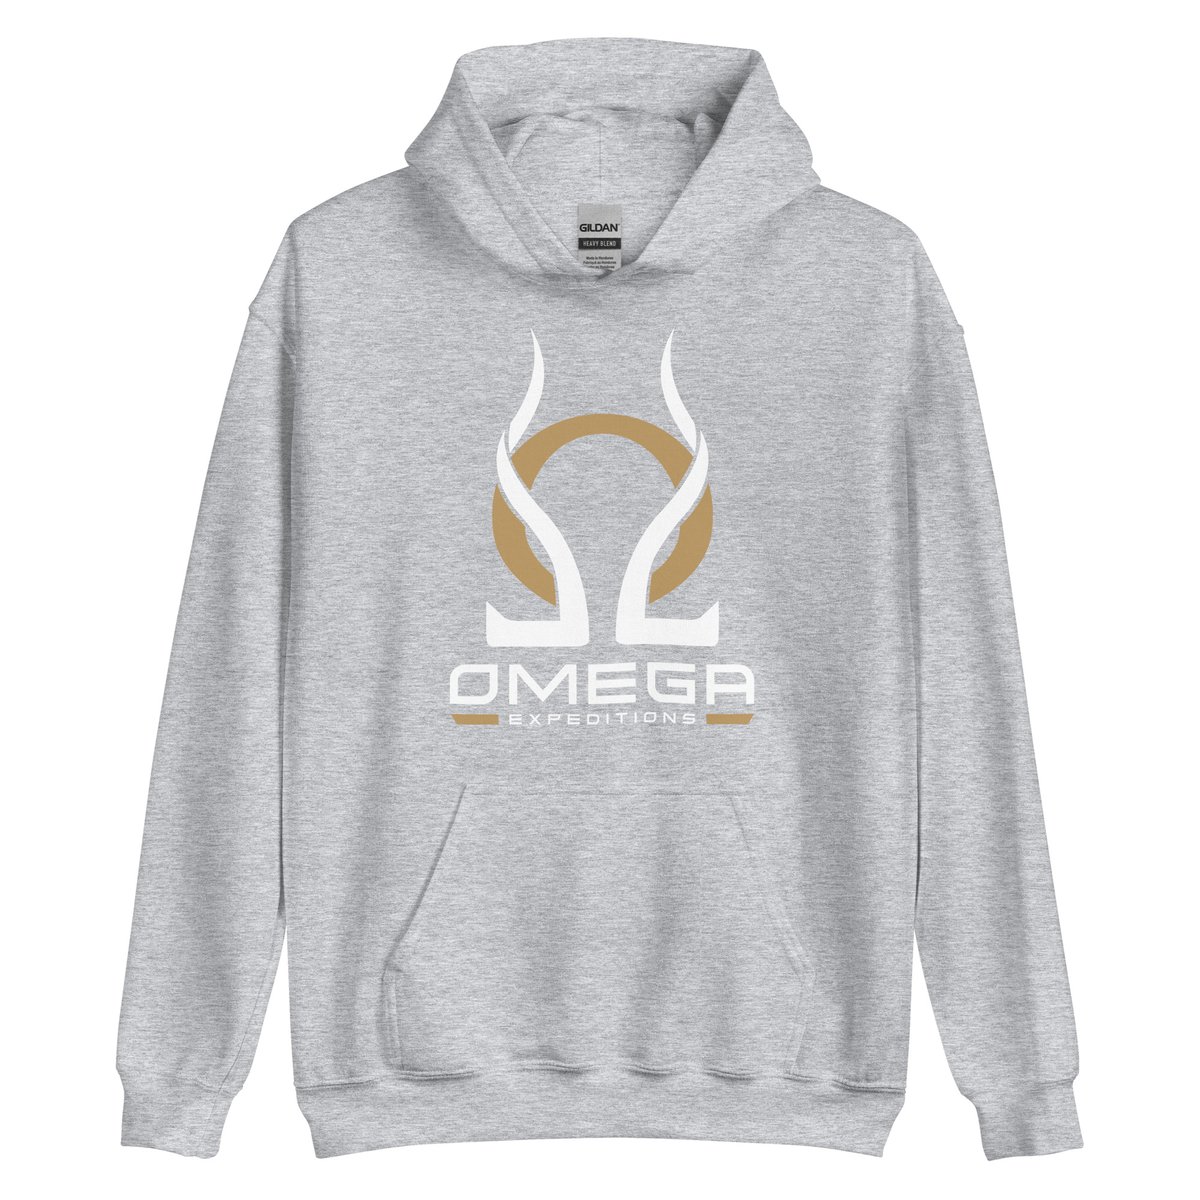 Image of Omega Expeditions Hoodie